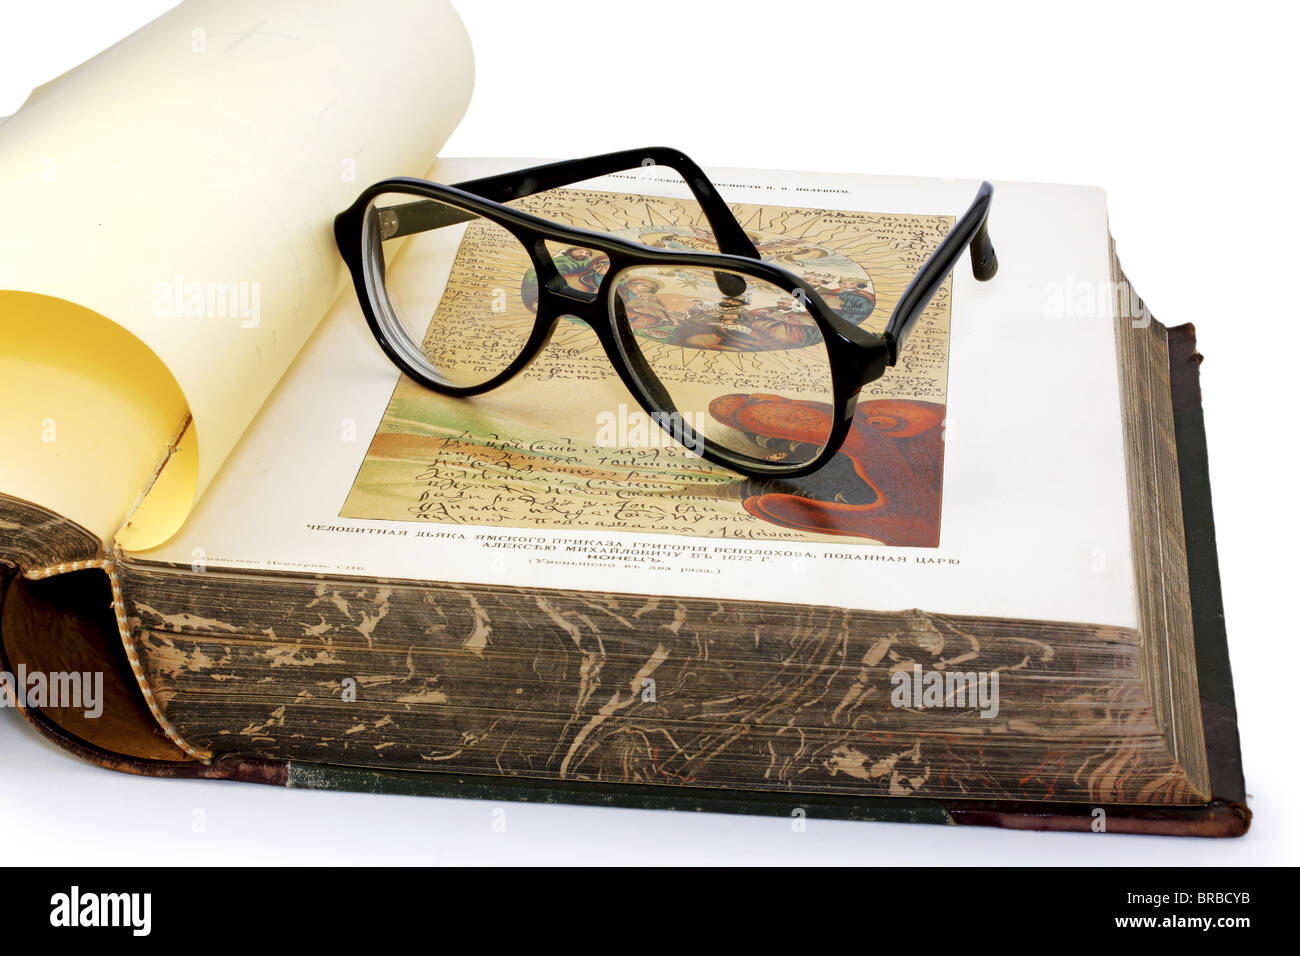 An open old book and black spectacles on it closeup Stock Photo